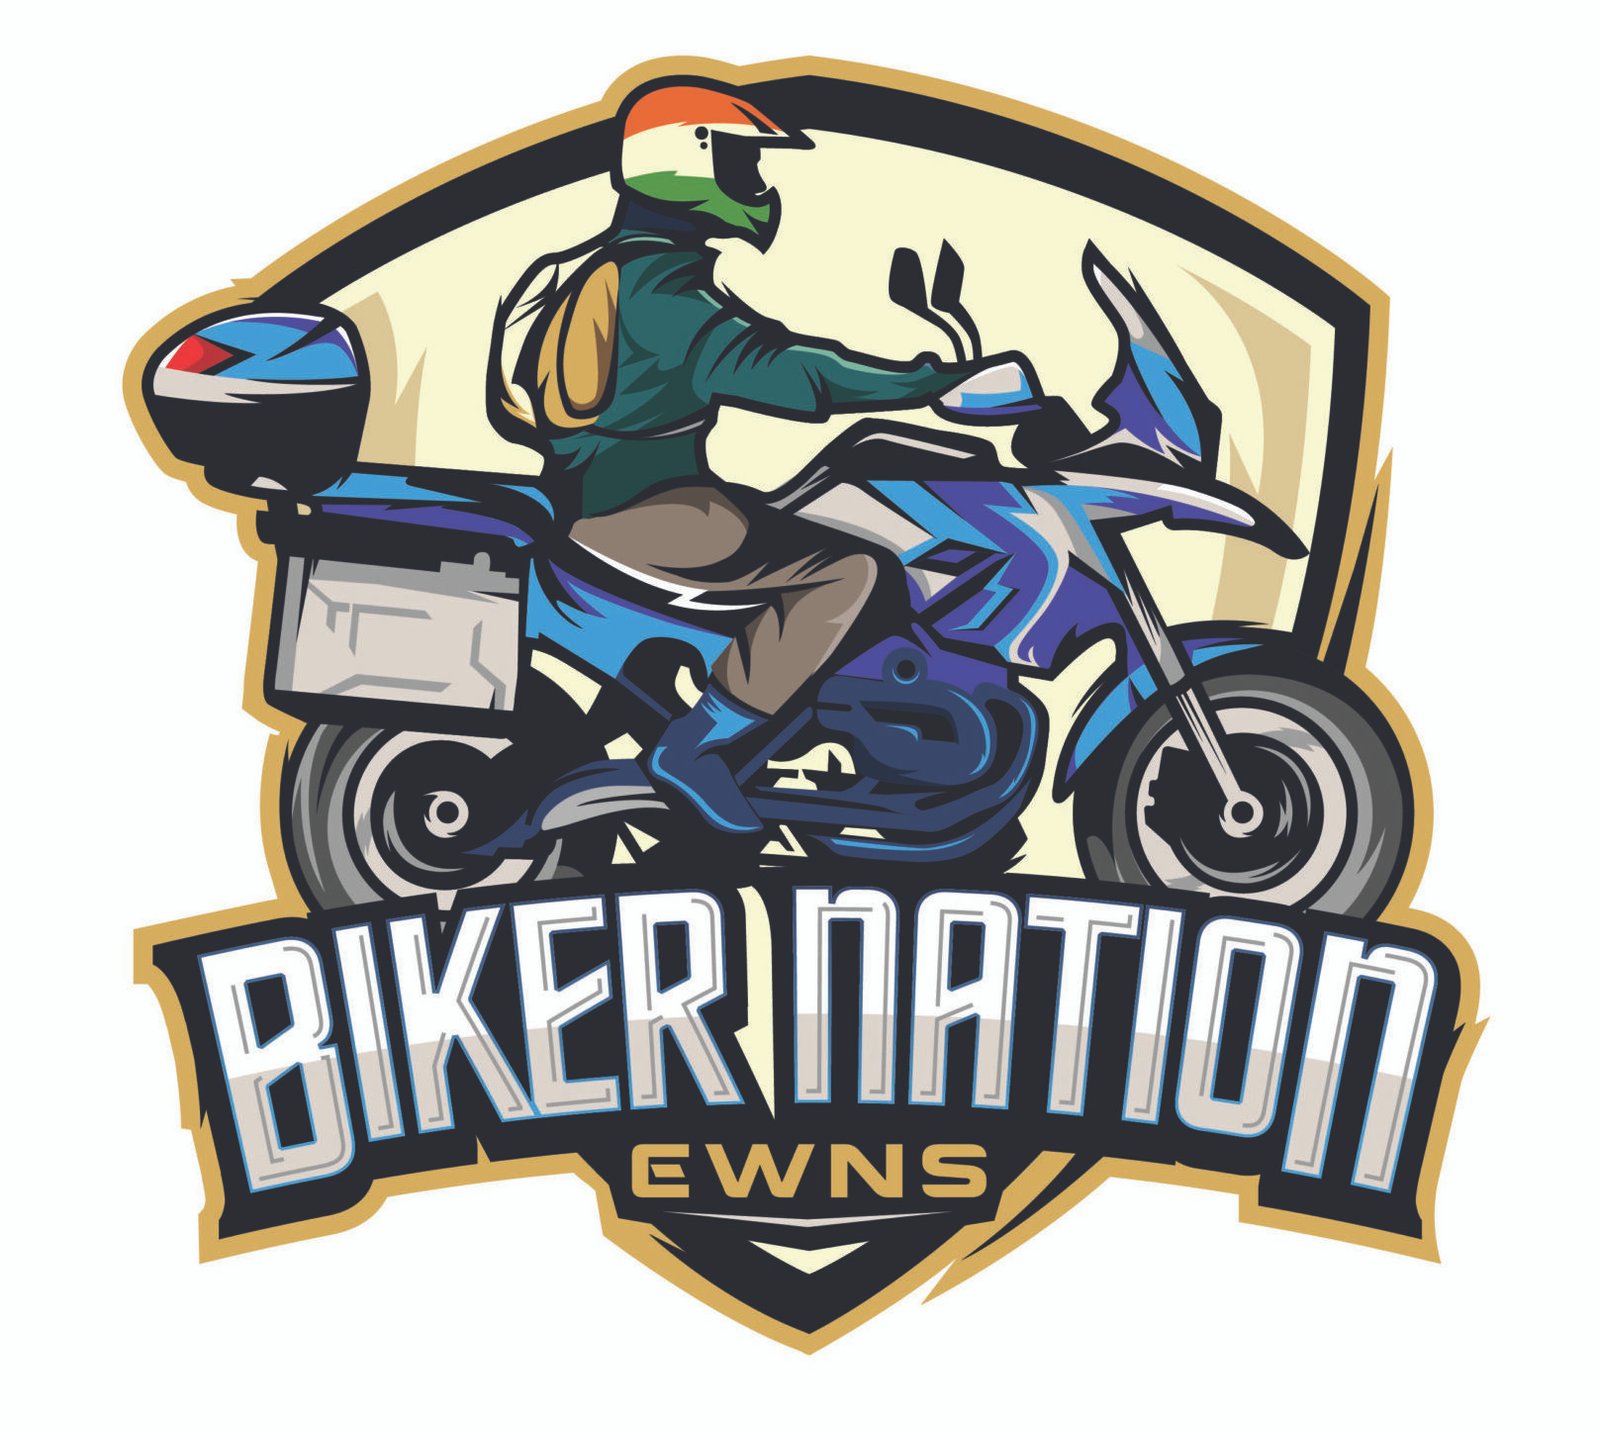 Why We Ride Motorcycles by Biker Nation N’E’S’W’ (Indian Chapter)